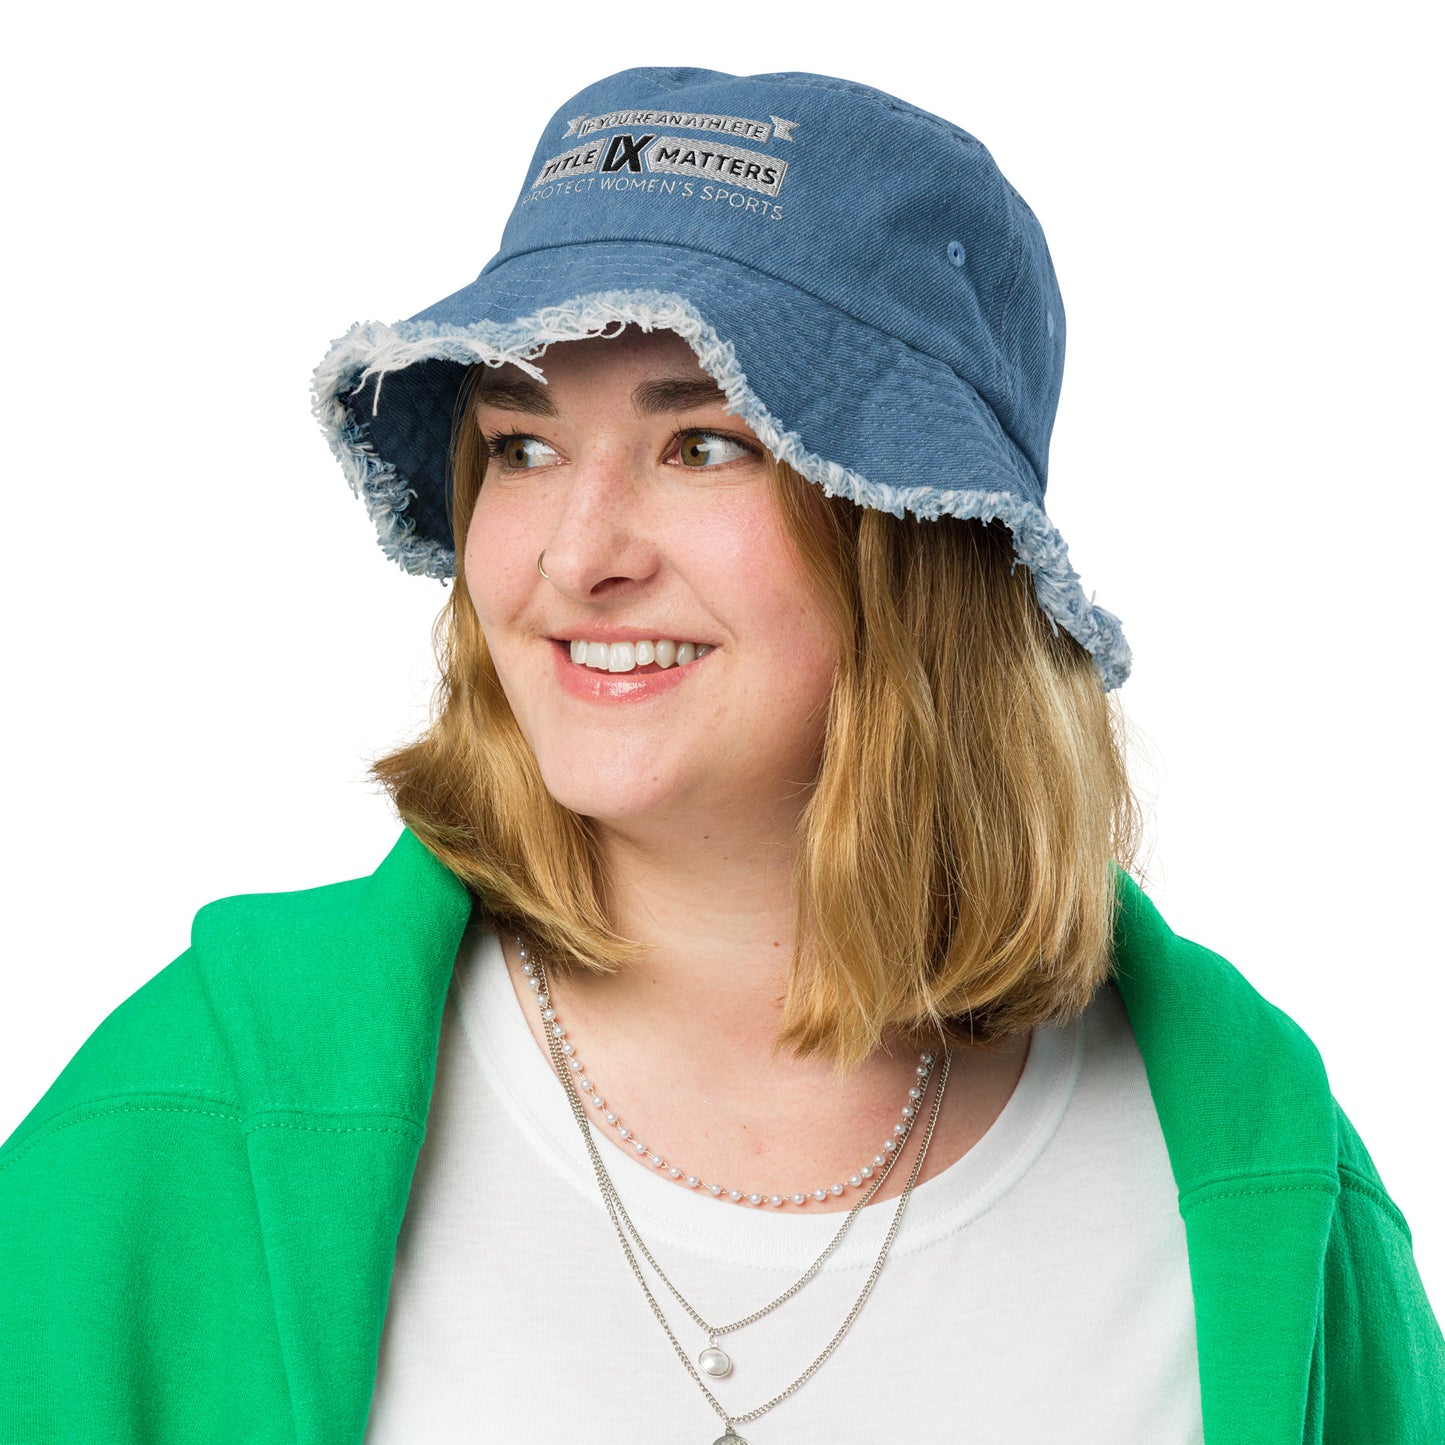 If You're an Athlete Distressed denim bucket hat